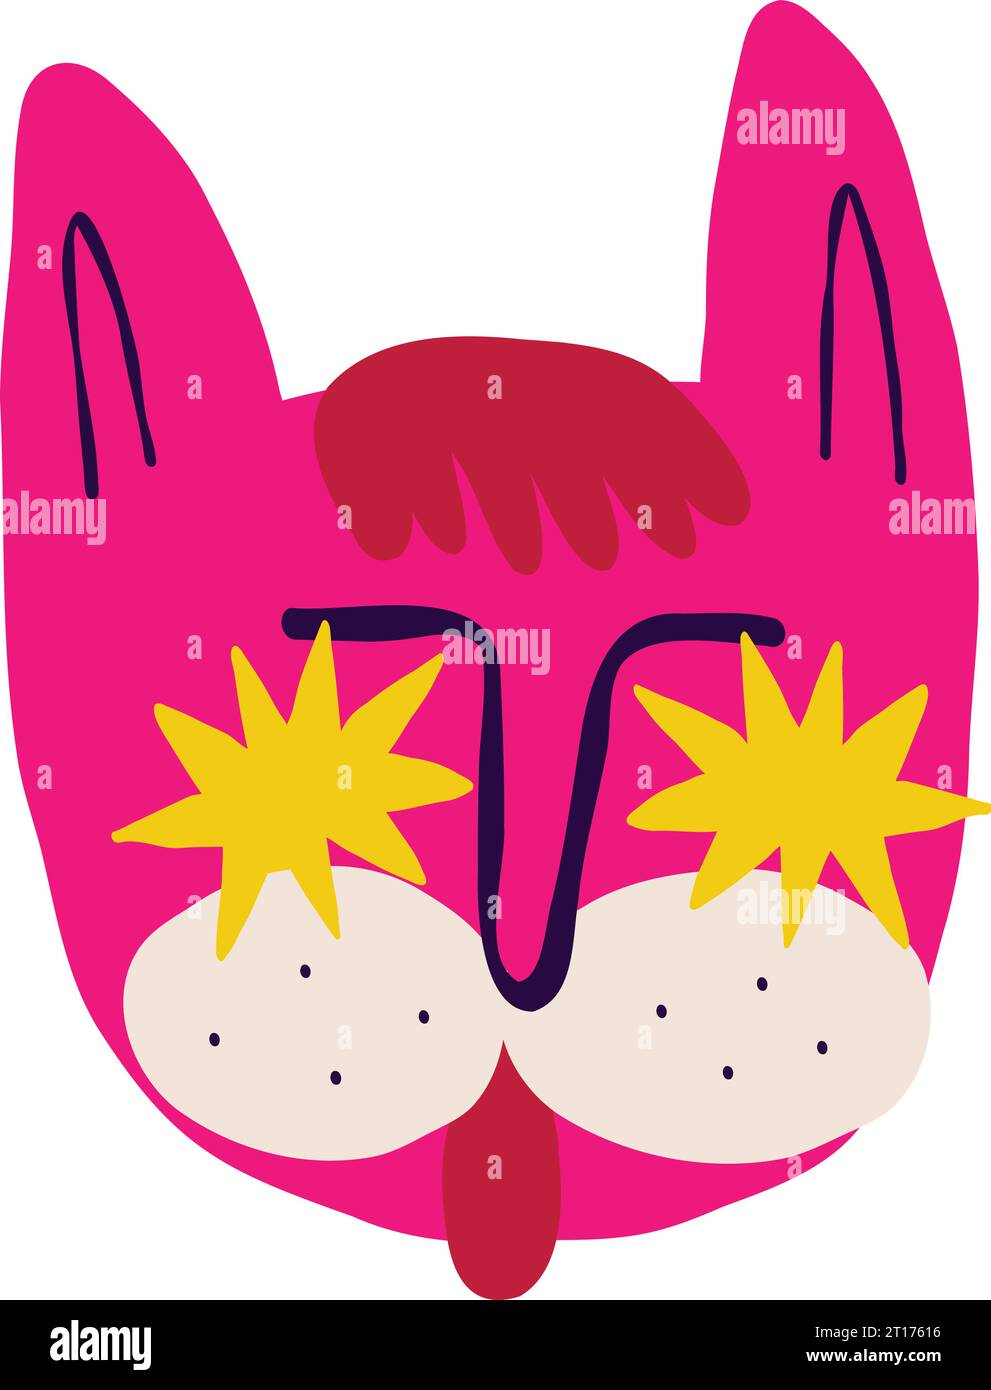 Fancy clockwork face of a cat with cool glasses. Illustration in a modern children's hand-drawn style Stock Vector